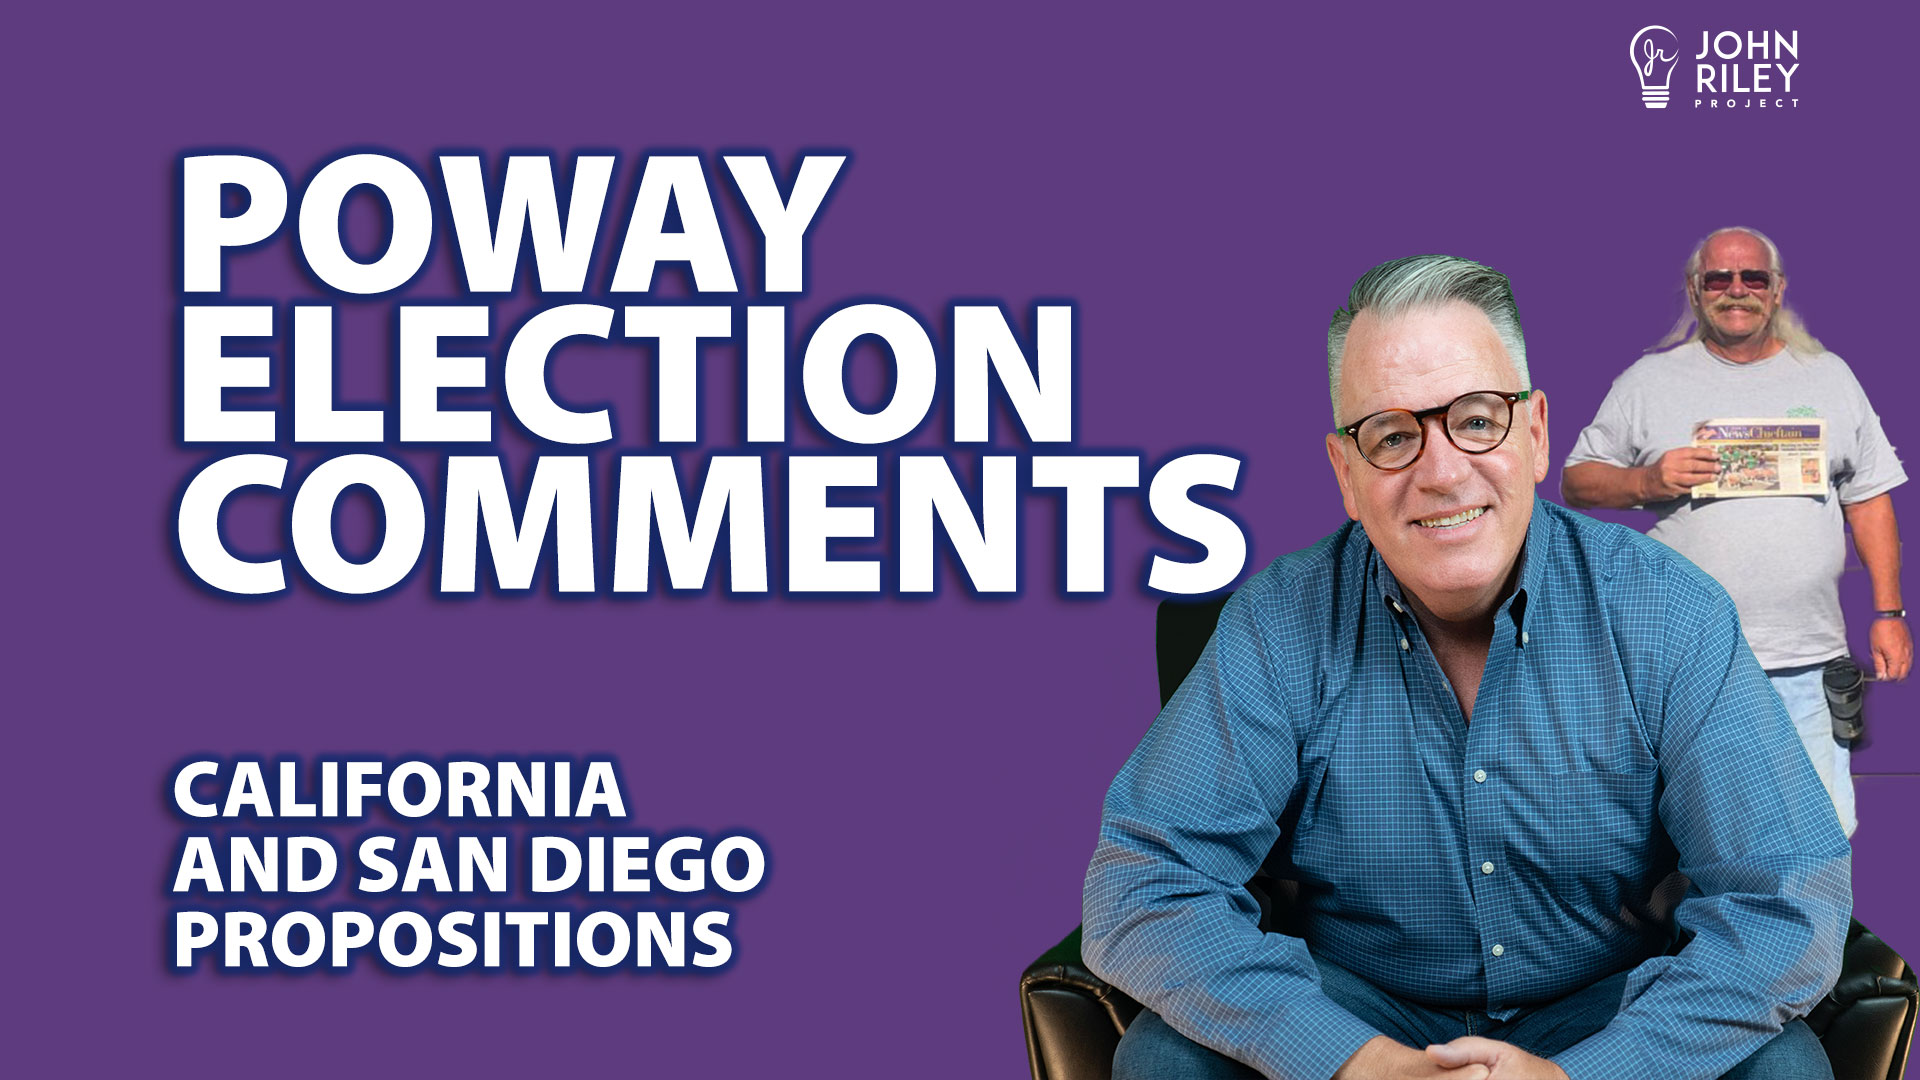 poway elections, california propositions, san diego, john riley project